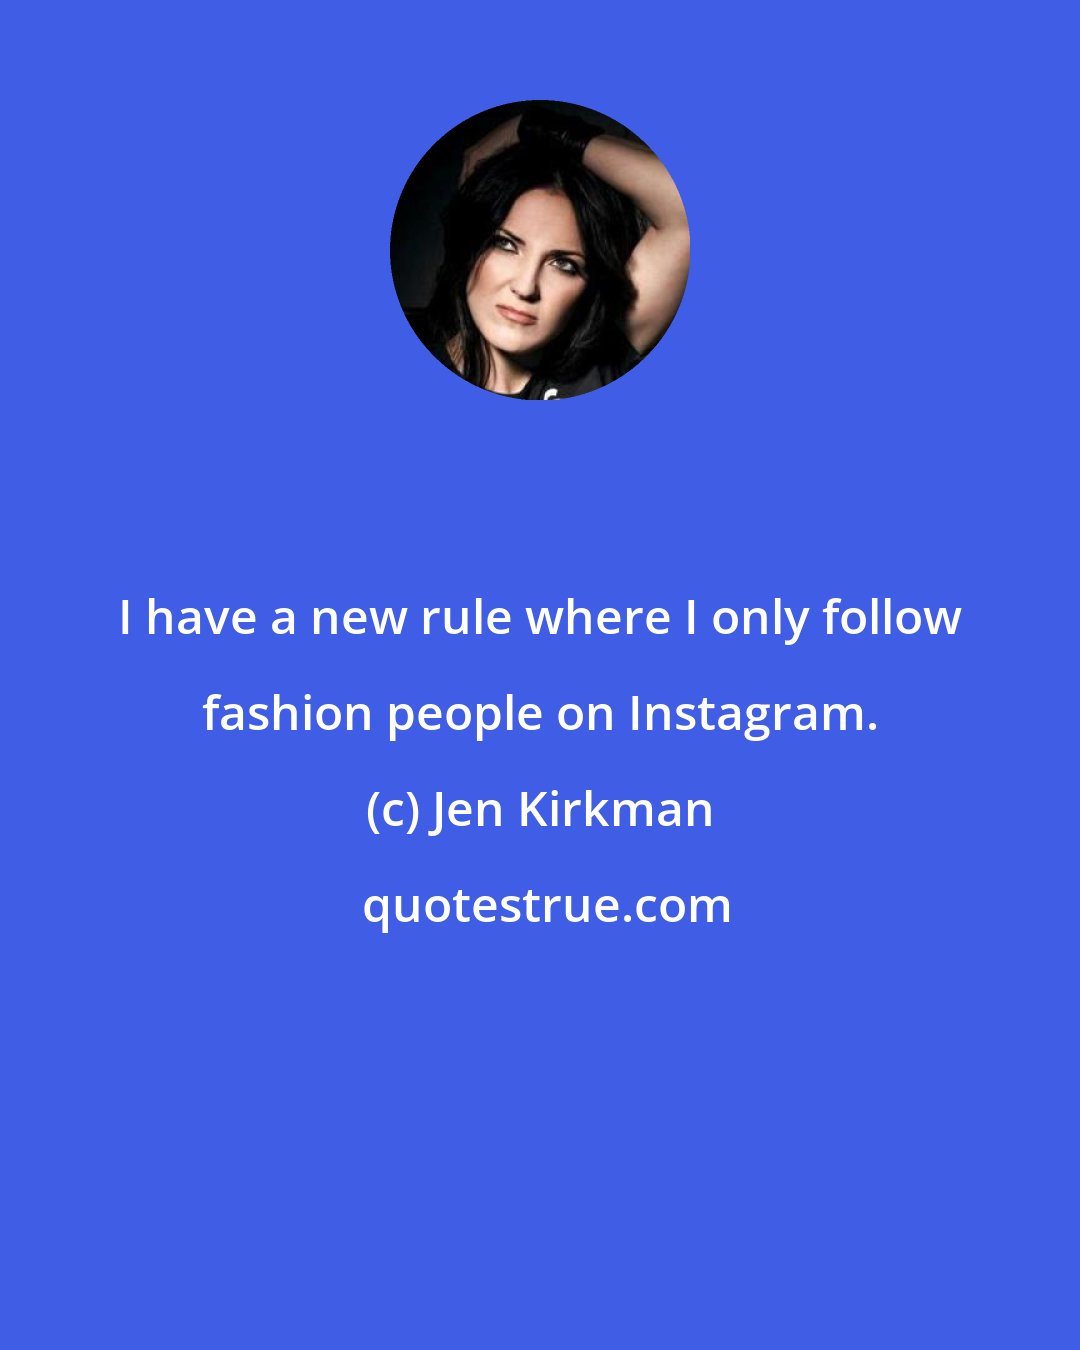 Jen Kirkman: I have a new rule where I only follow fashion people on Instagram.